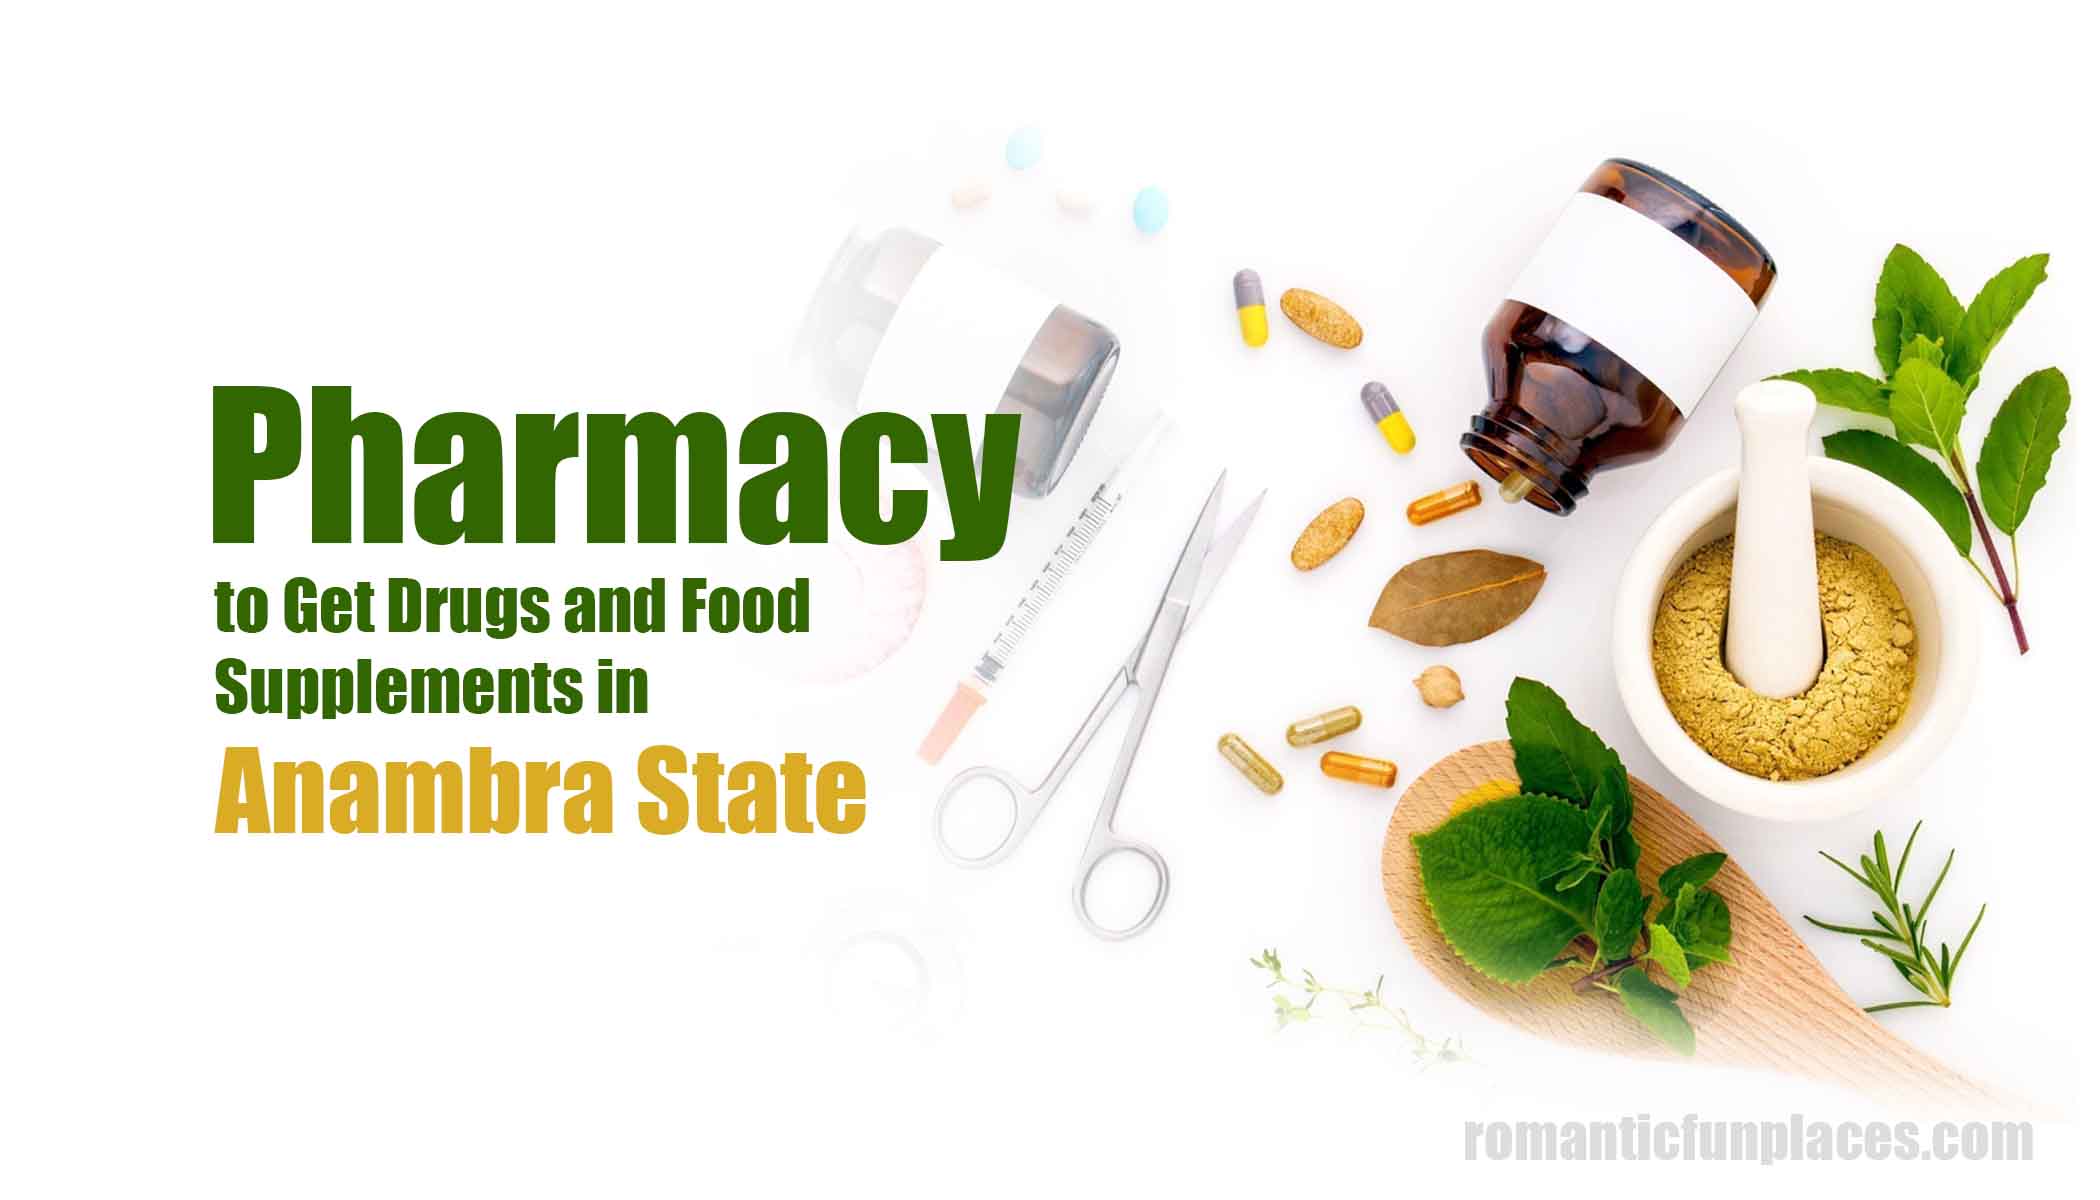 Pharmacy to Get Drugs and Food Supplements in Anambra State